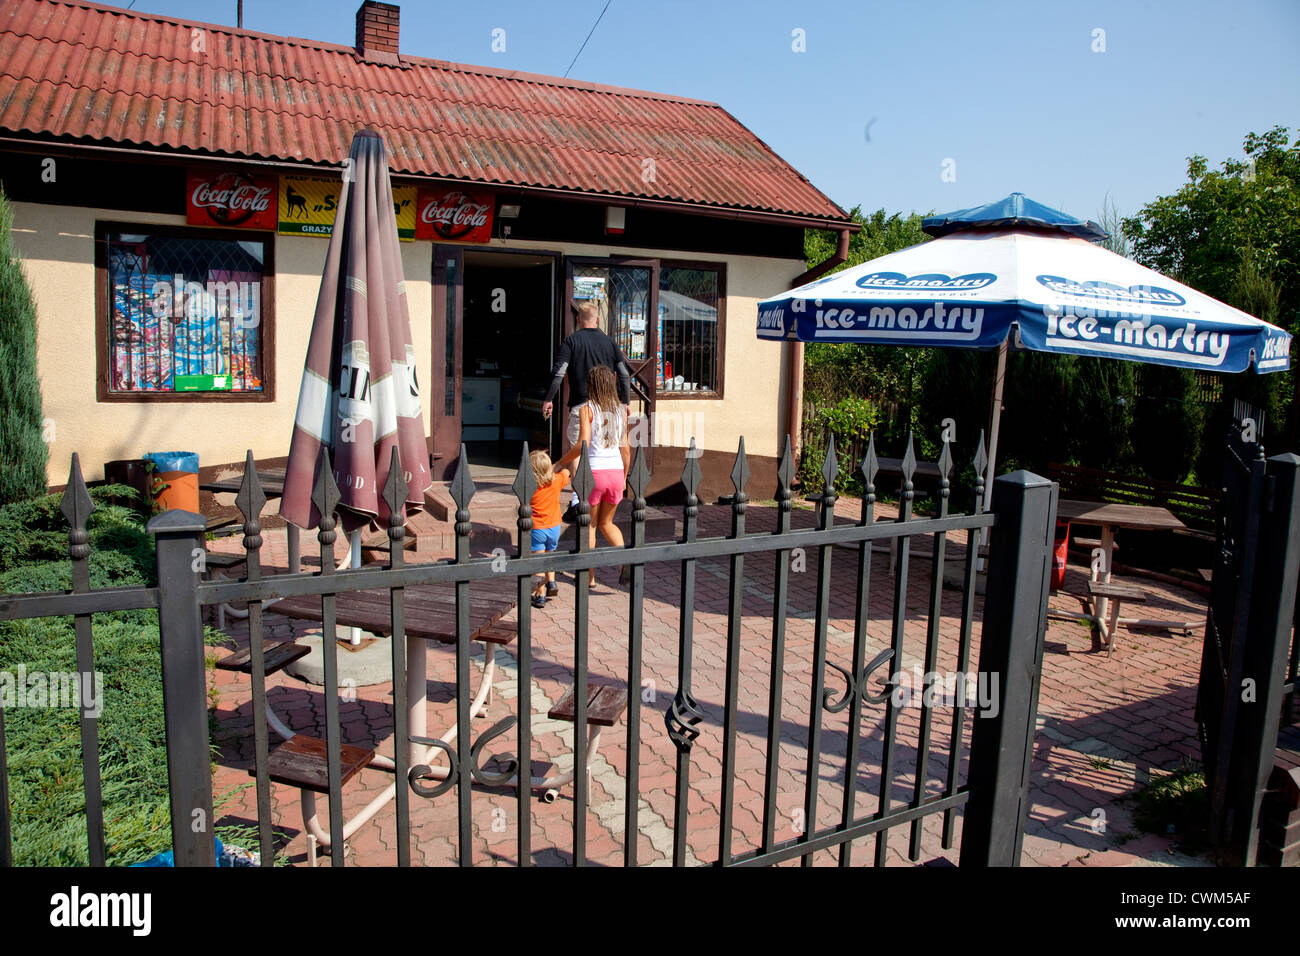 Small Polish convenience grocery store patio with umbrellas and tables. Krolowa Wola Central Poland Stock Photo